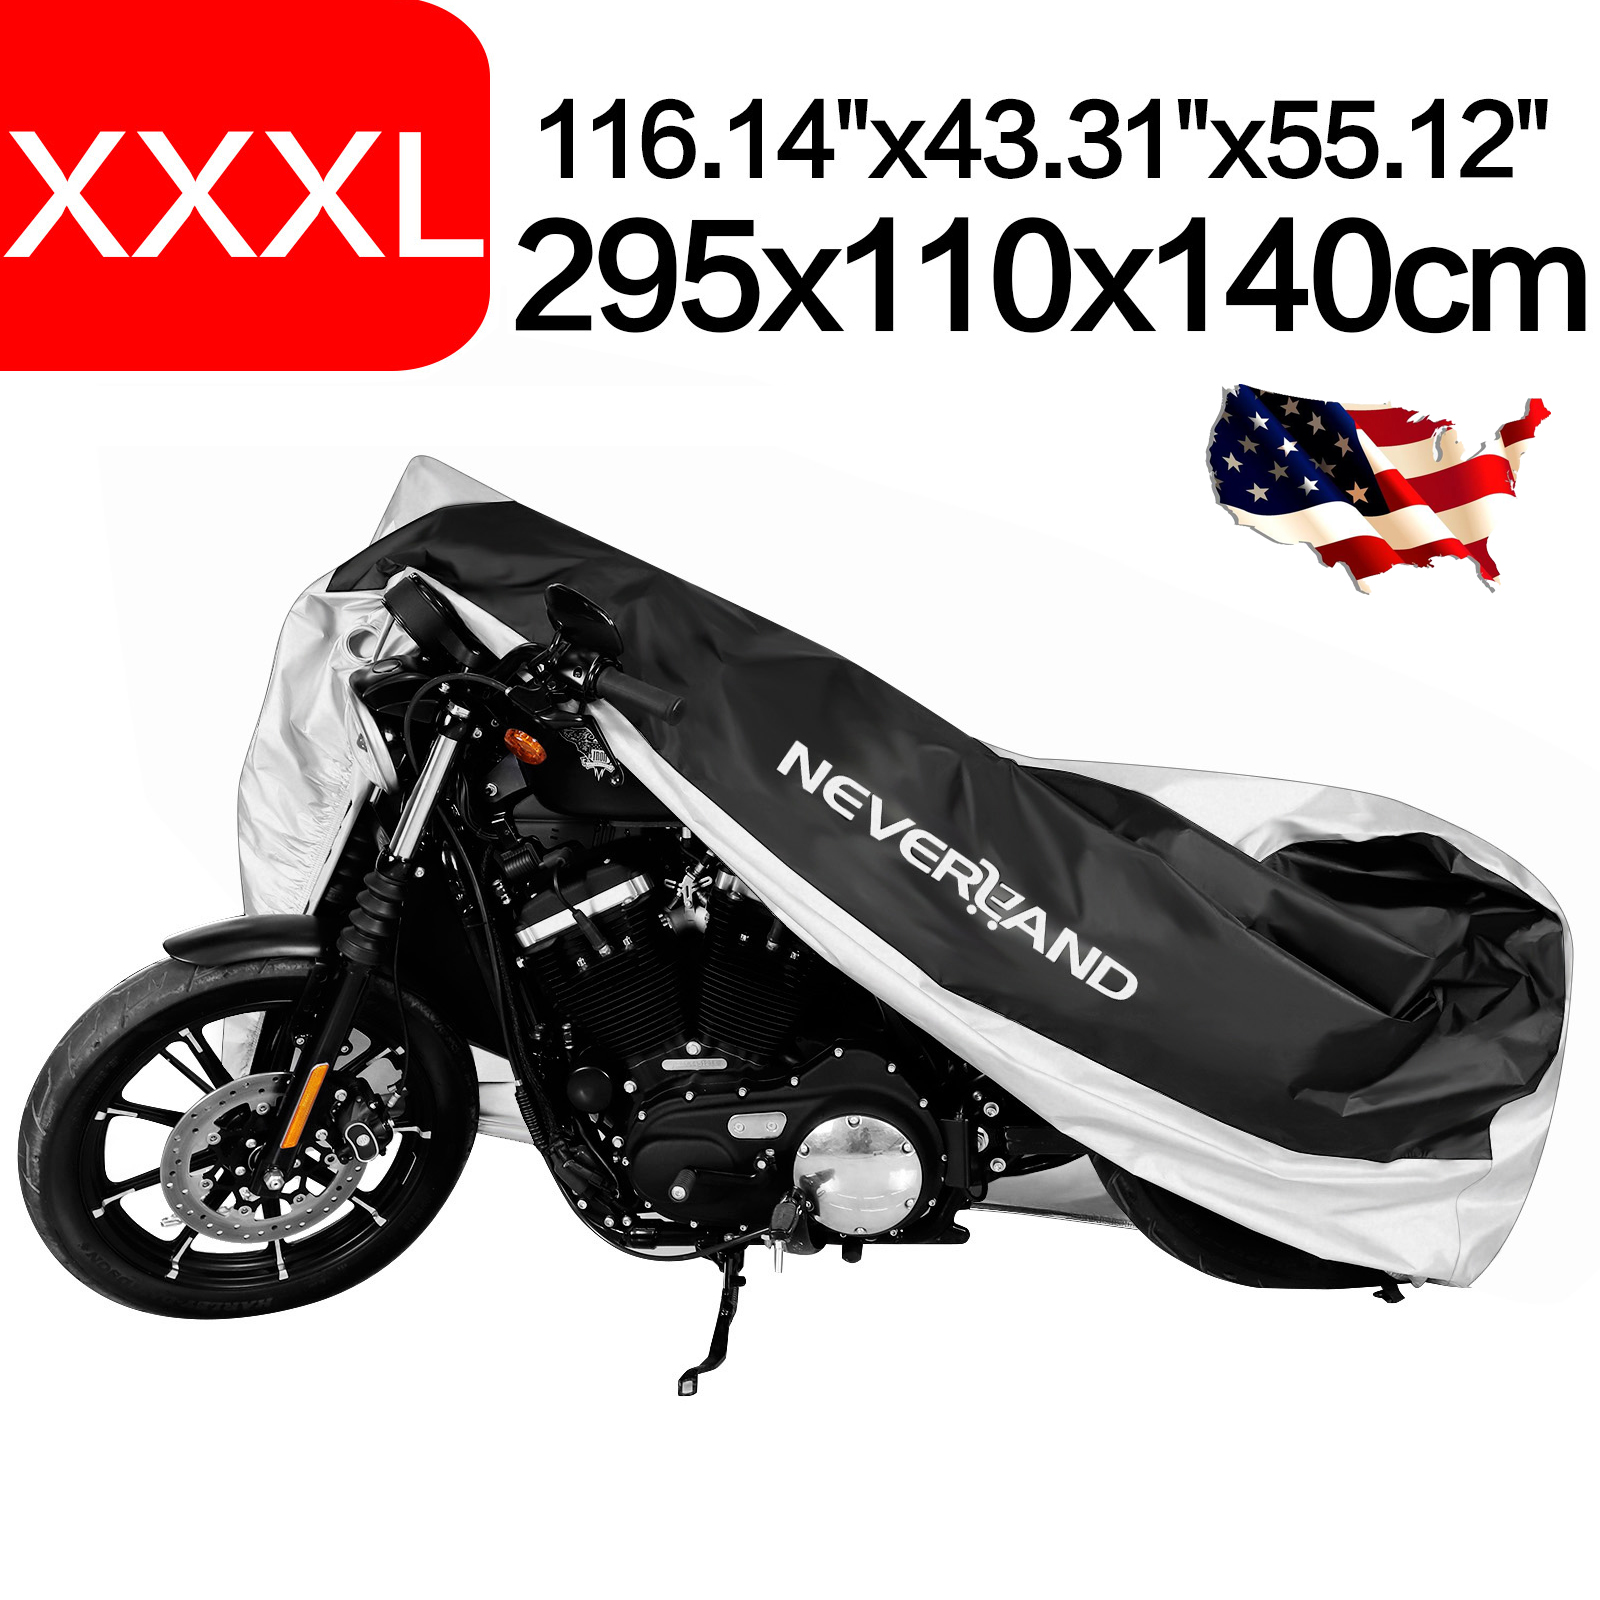 XXL Waaterproof Motorcycle Cover For Harley Electra Glide Ultra Classic FLHTCU